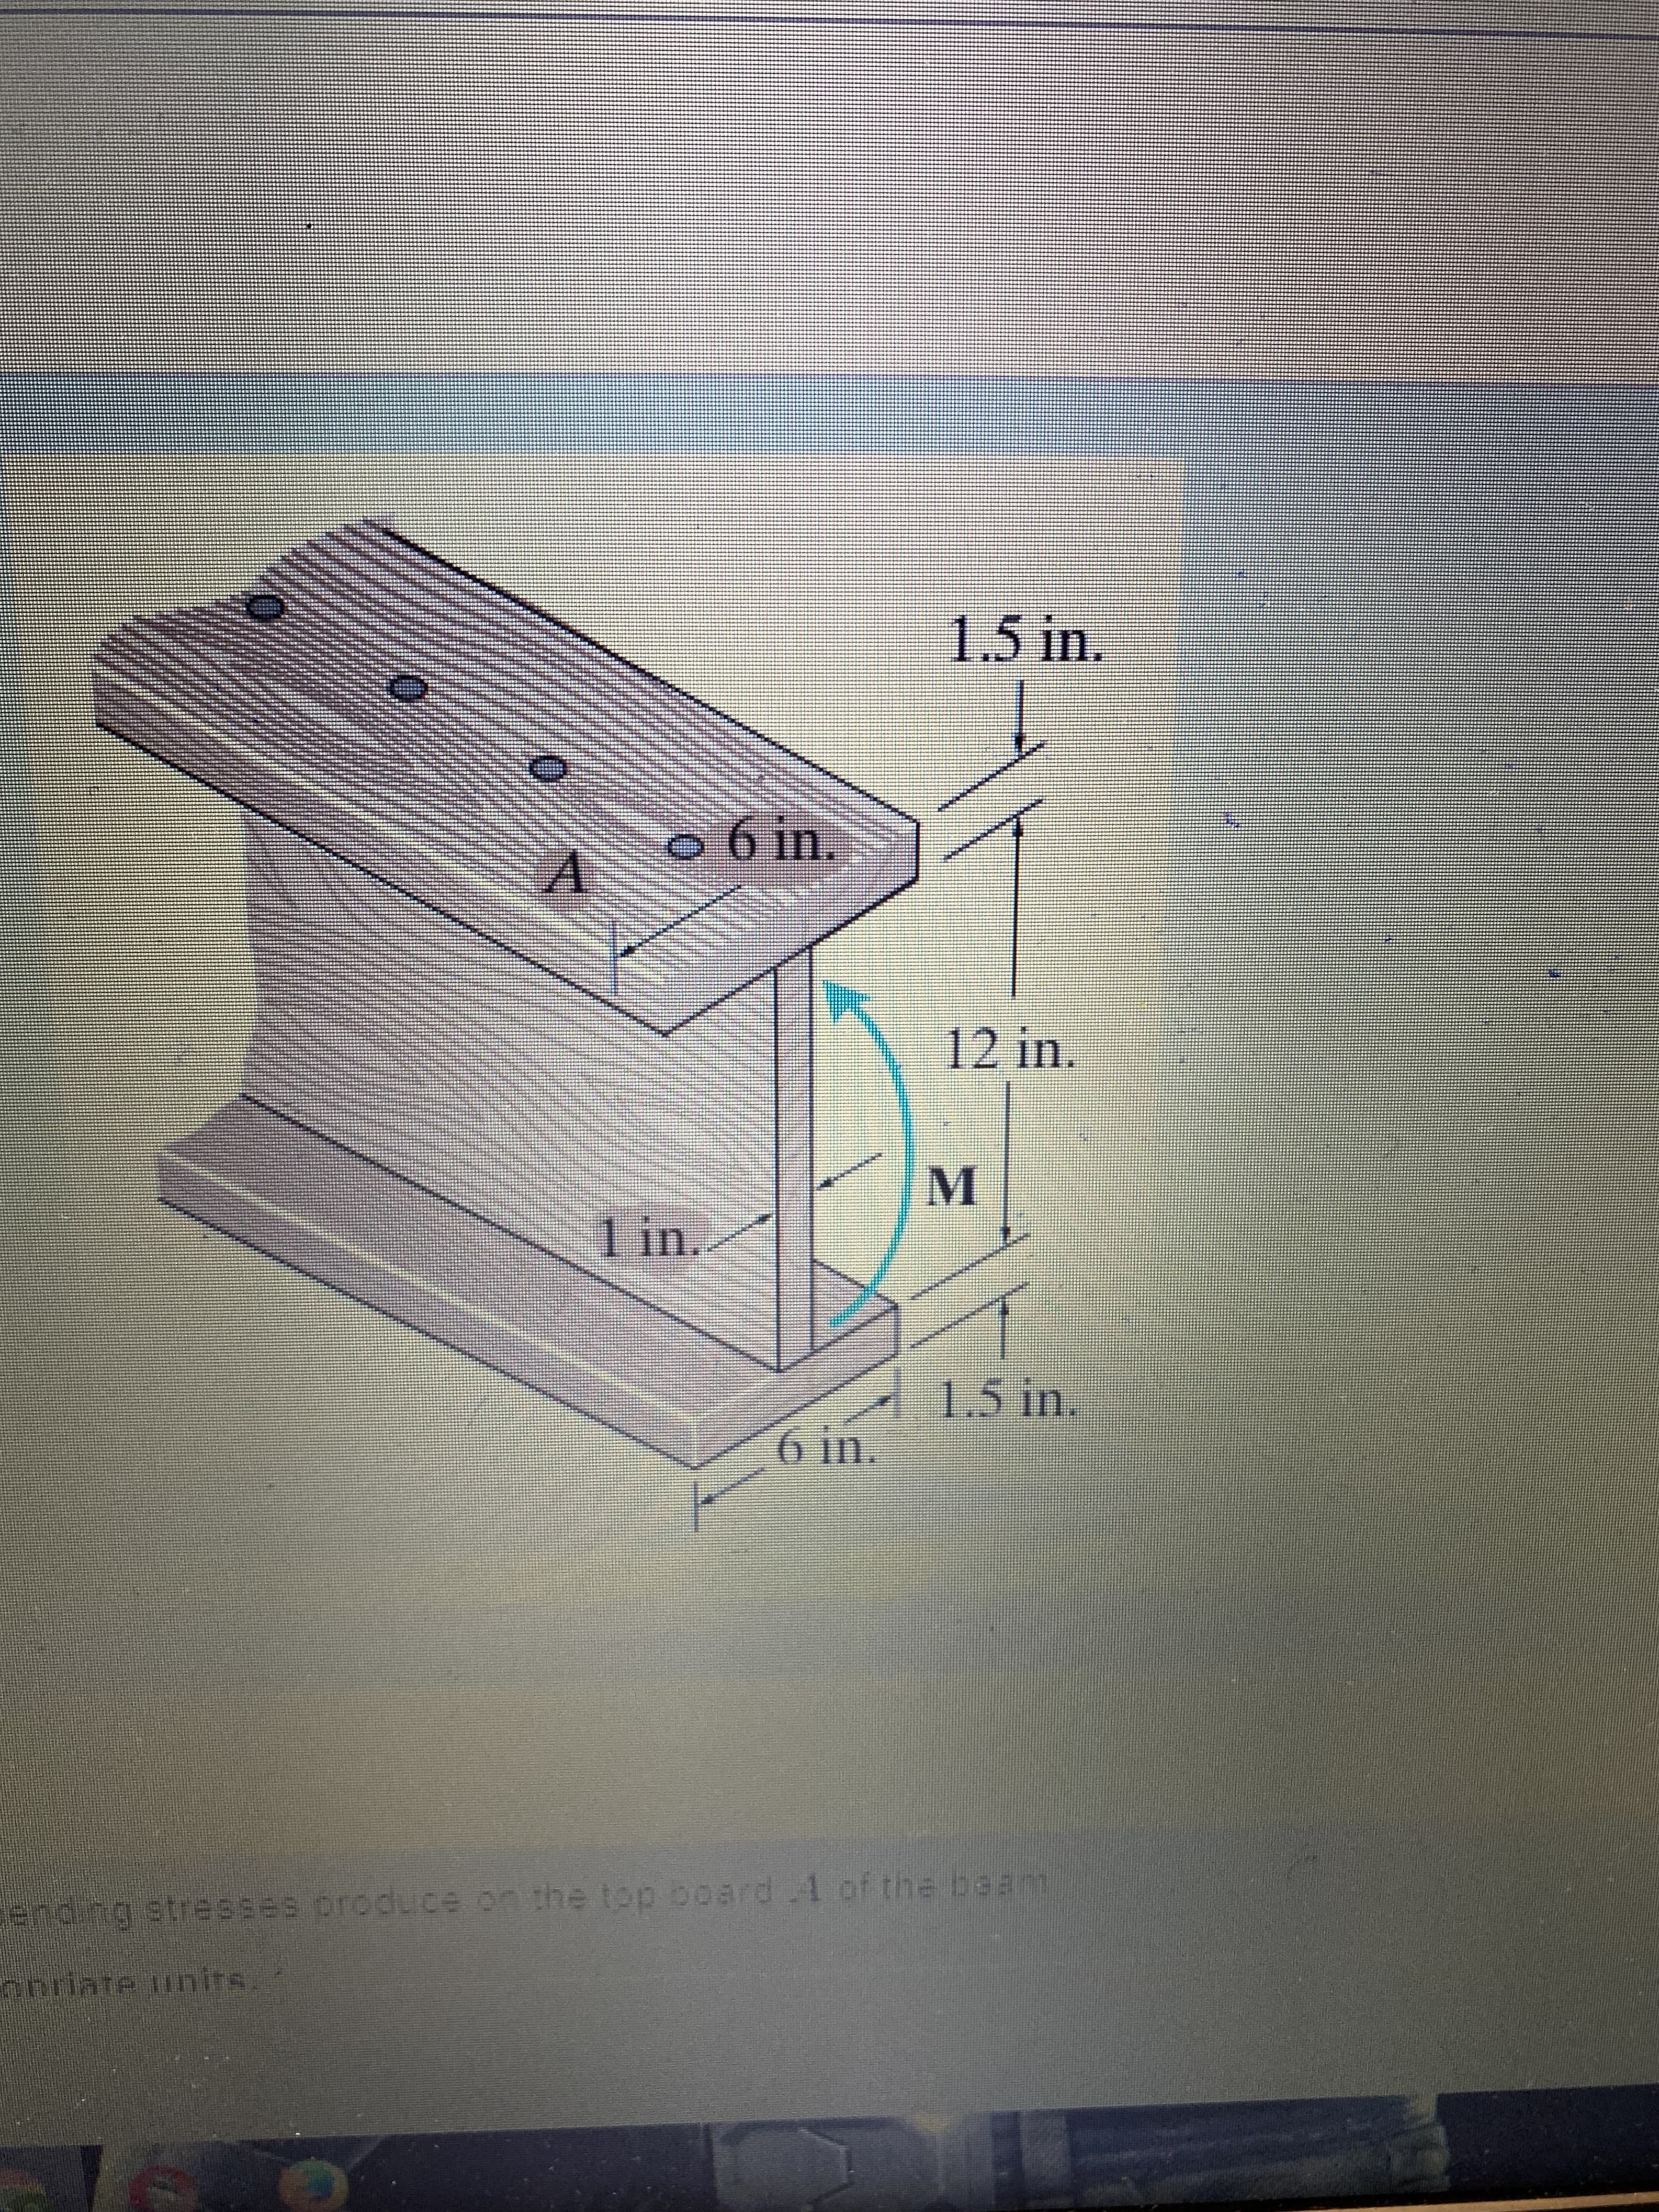 1.5 in.
aR IE aukart
12 in.
1 in.
1.5 in.
ending stresses produce on the top board 4 of the beam
onriate iinits
